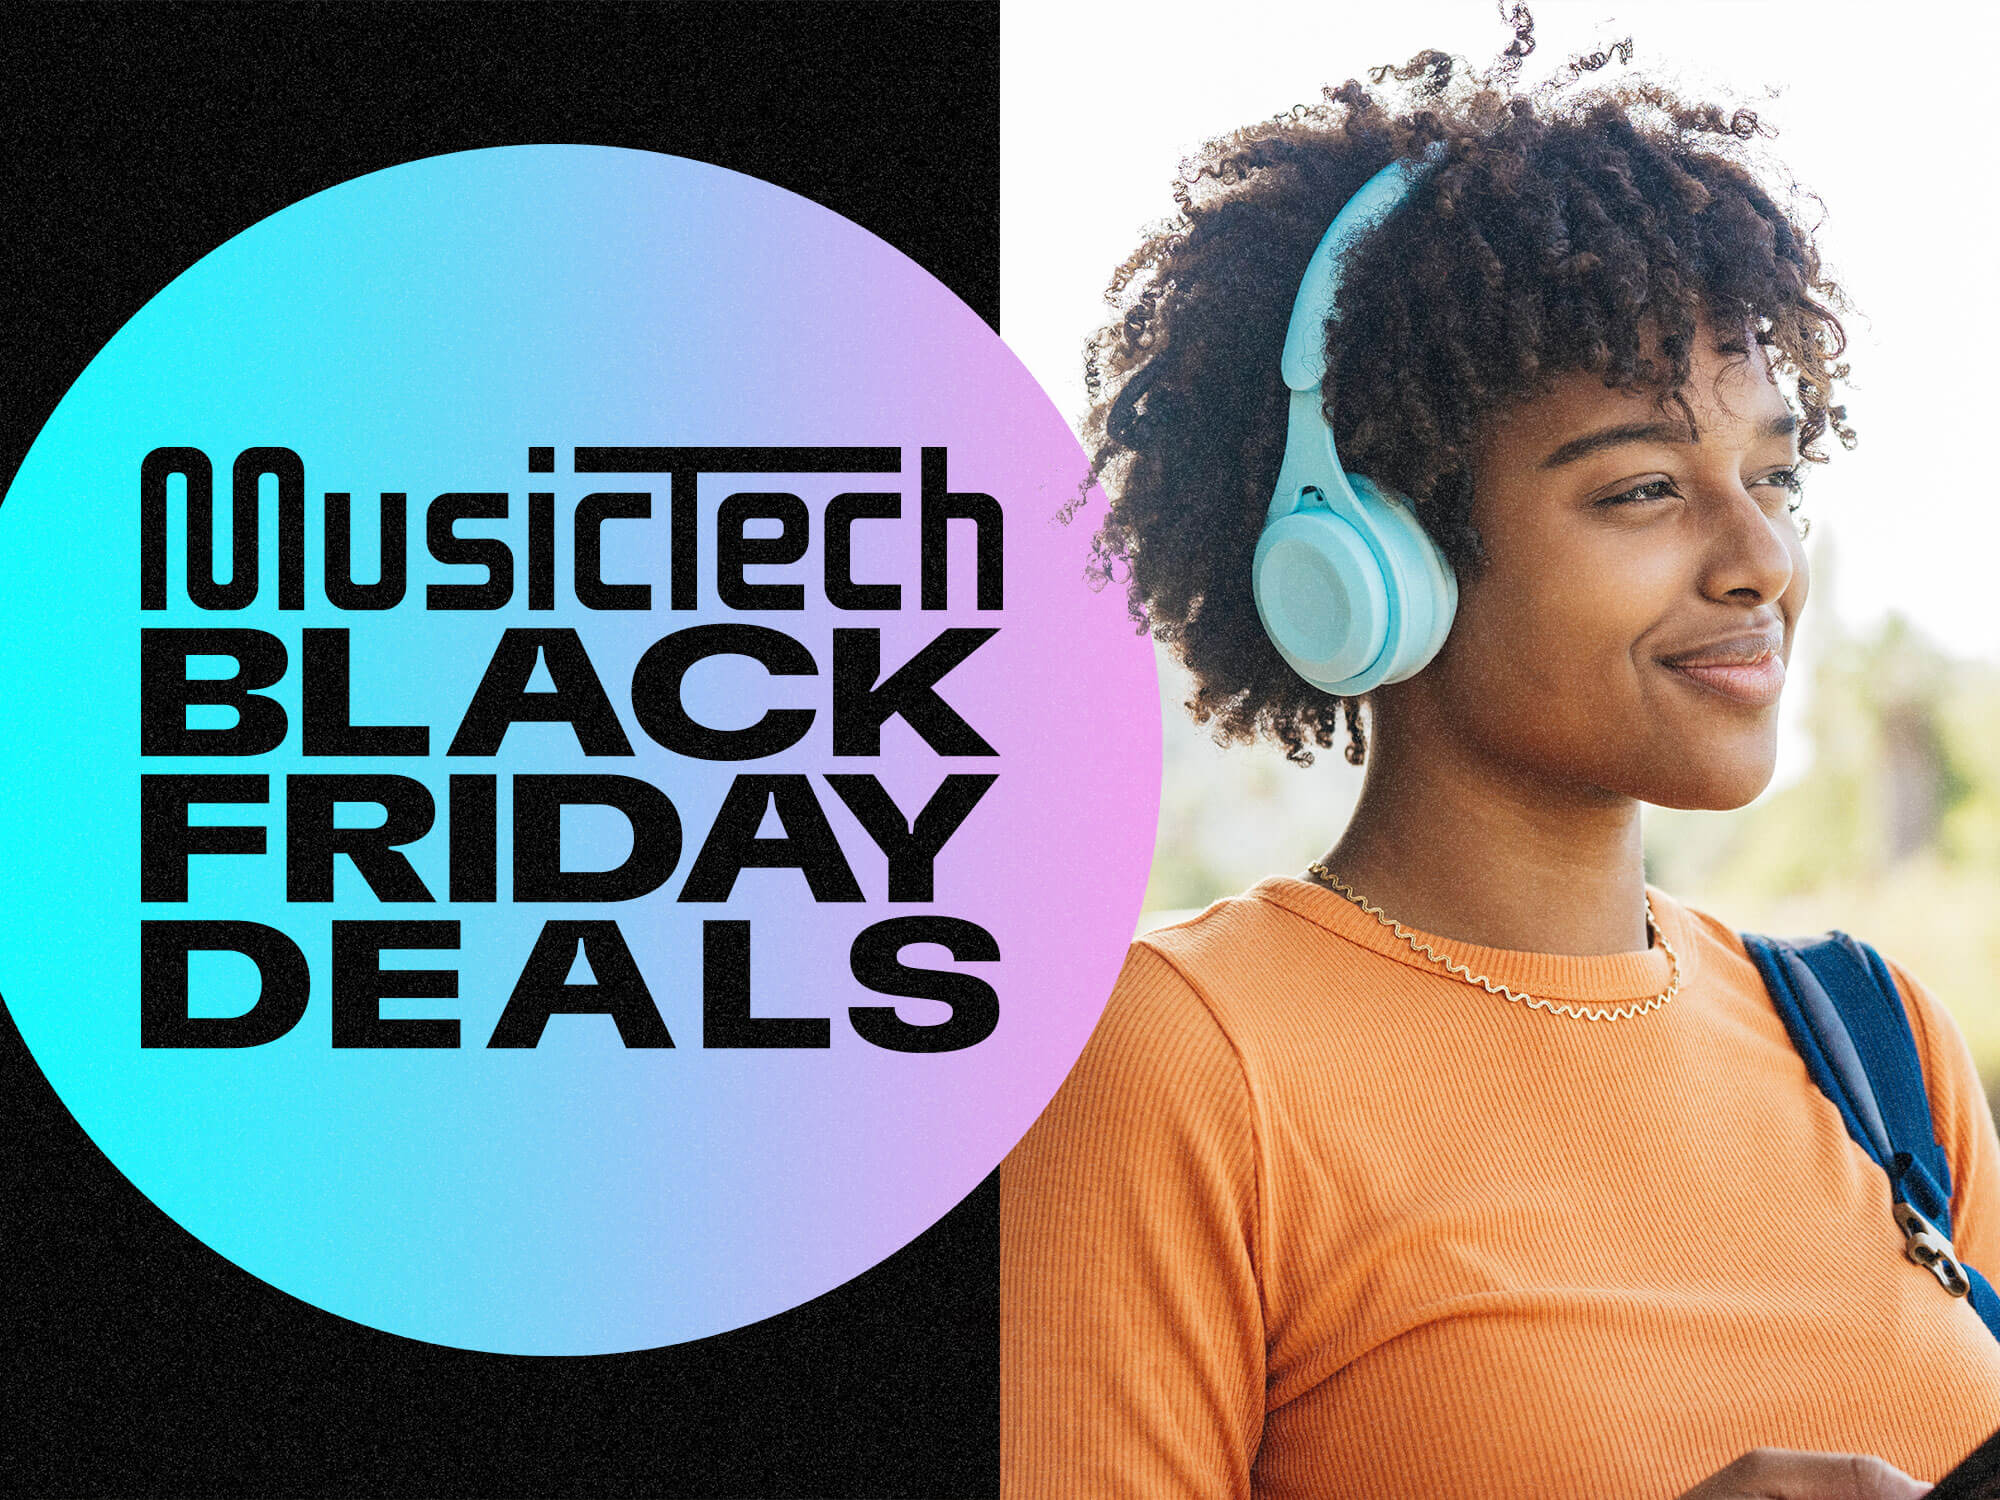 Black Friday text next to Young Afro-Latin woman with blue headphones holding a mobile phone walking through a park next to a lake.